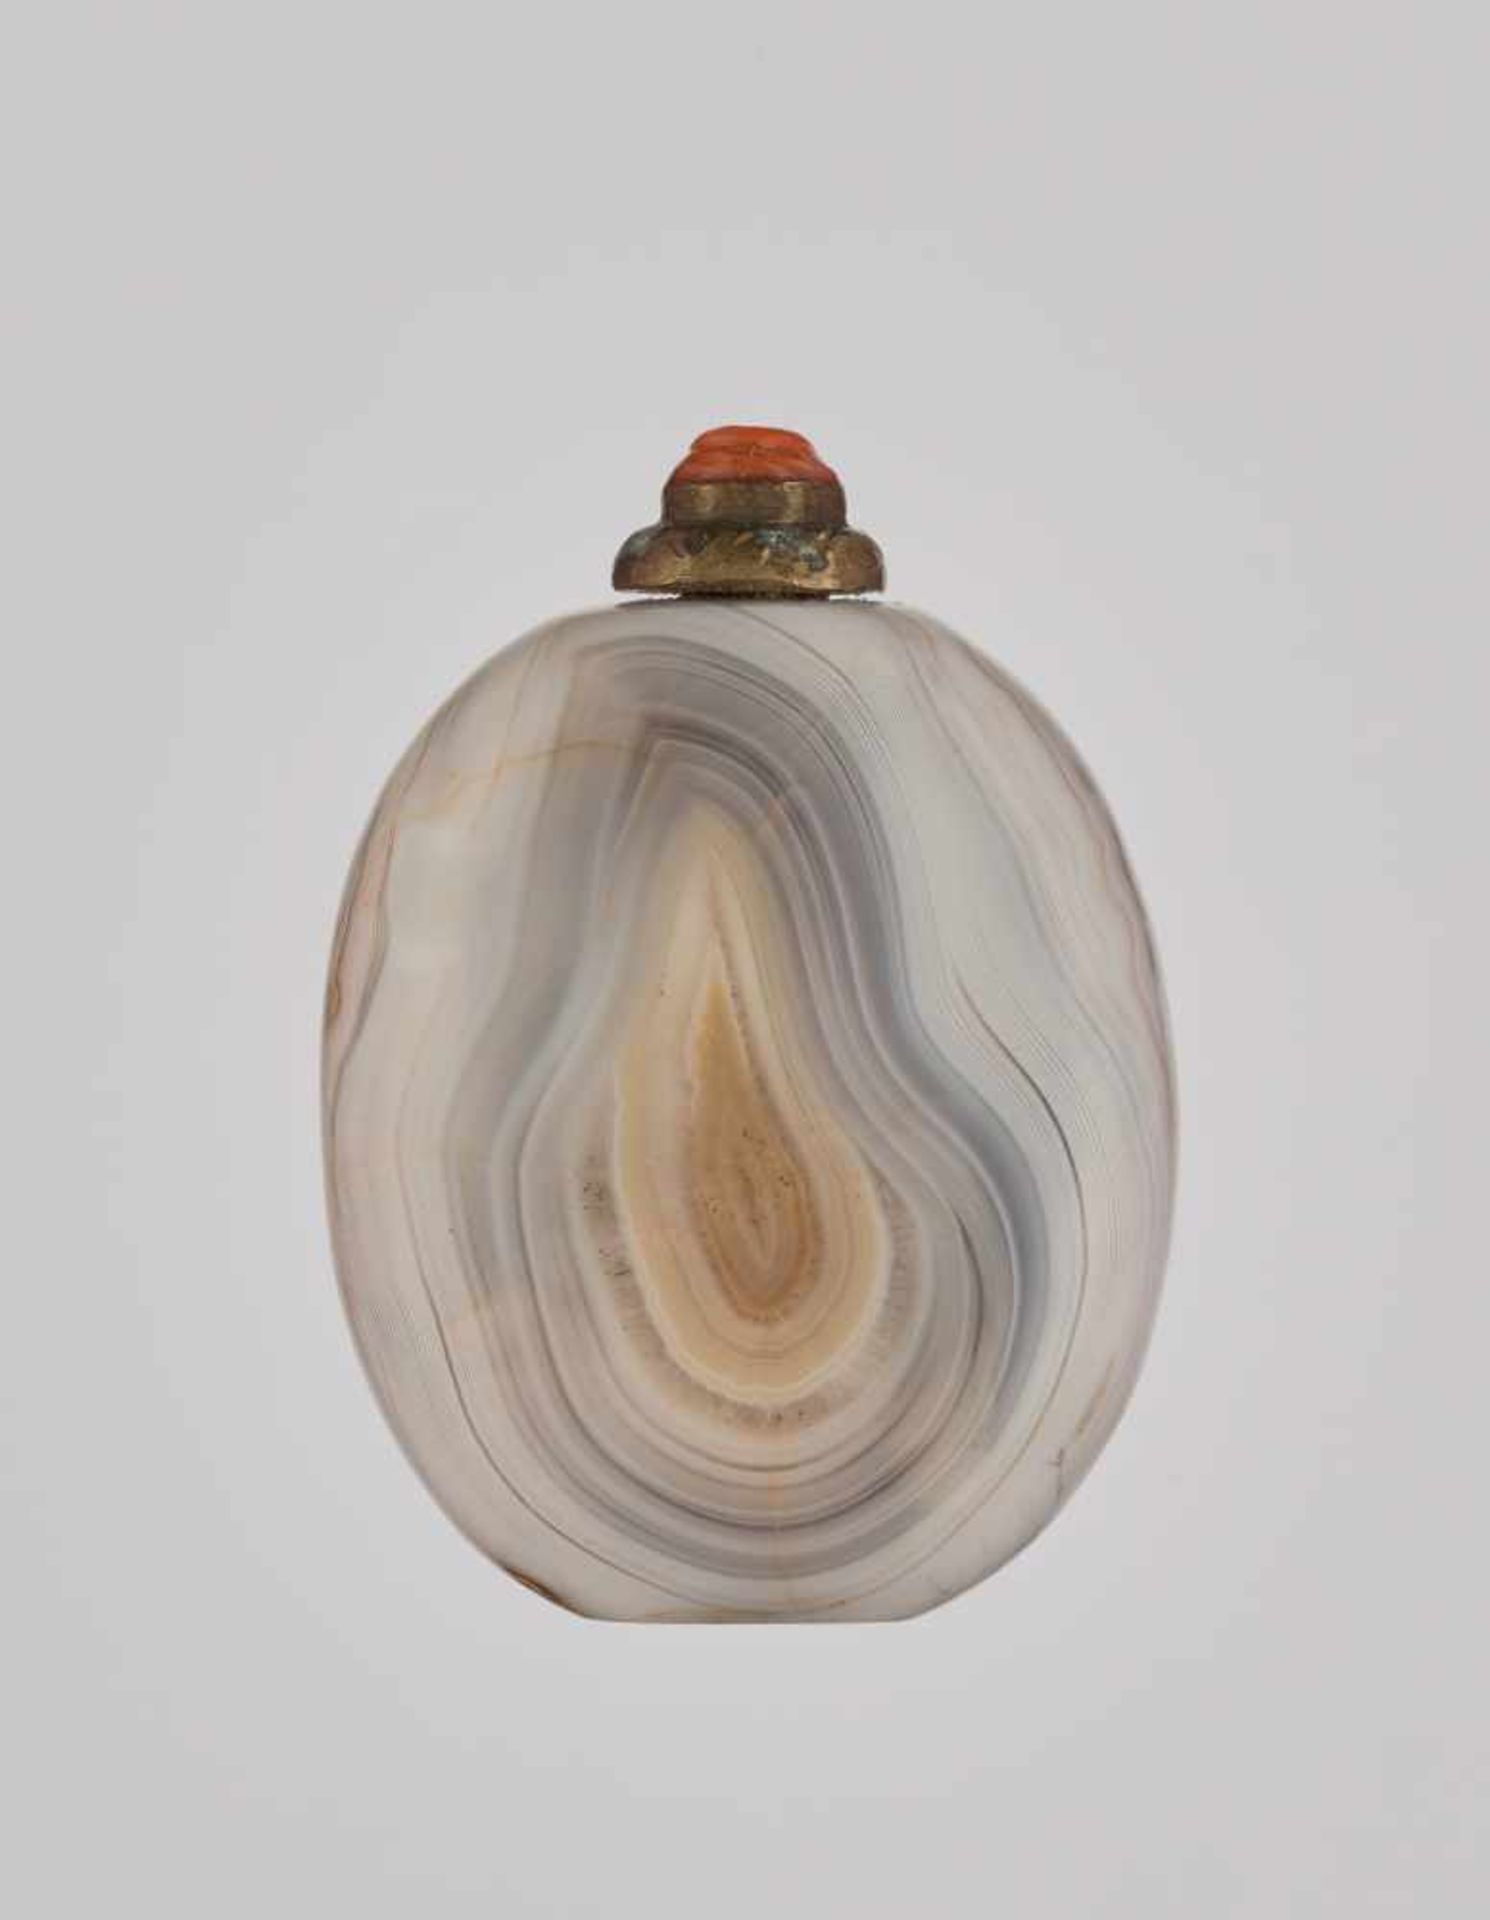 A PEBBLE-FORM 'THUMBPRINT' AGATE SNUFF BOTTLE, QING DYNASTY Banded agate of natural pebble form with